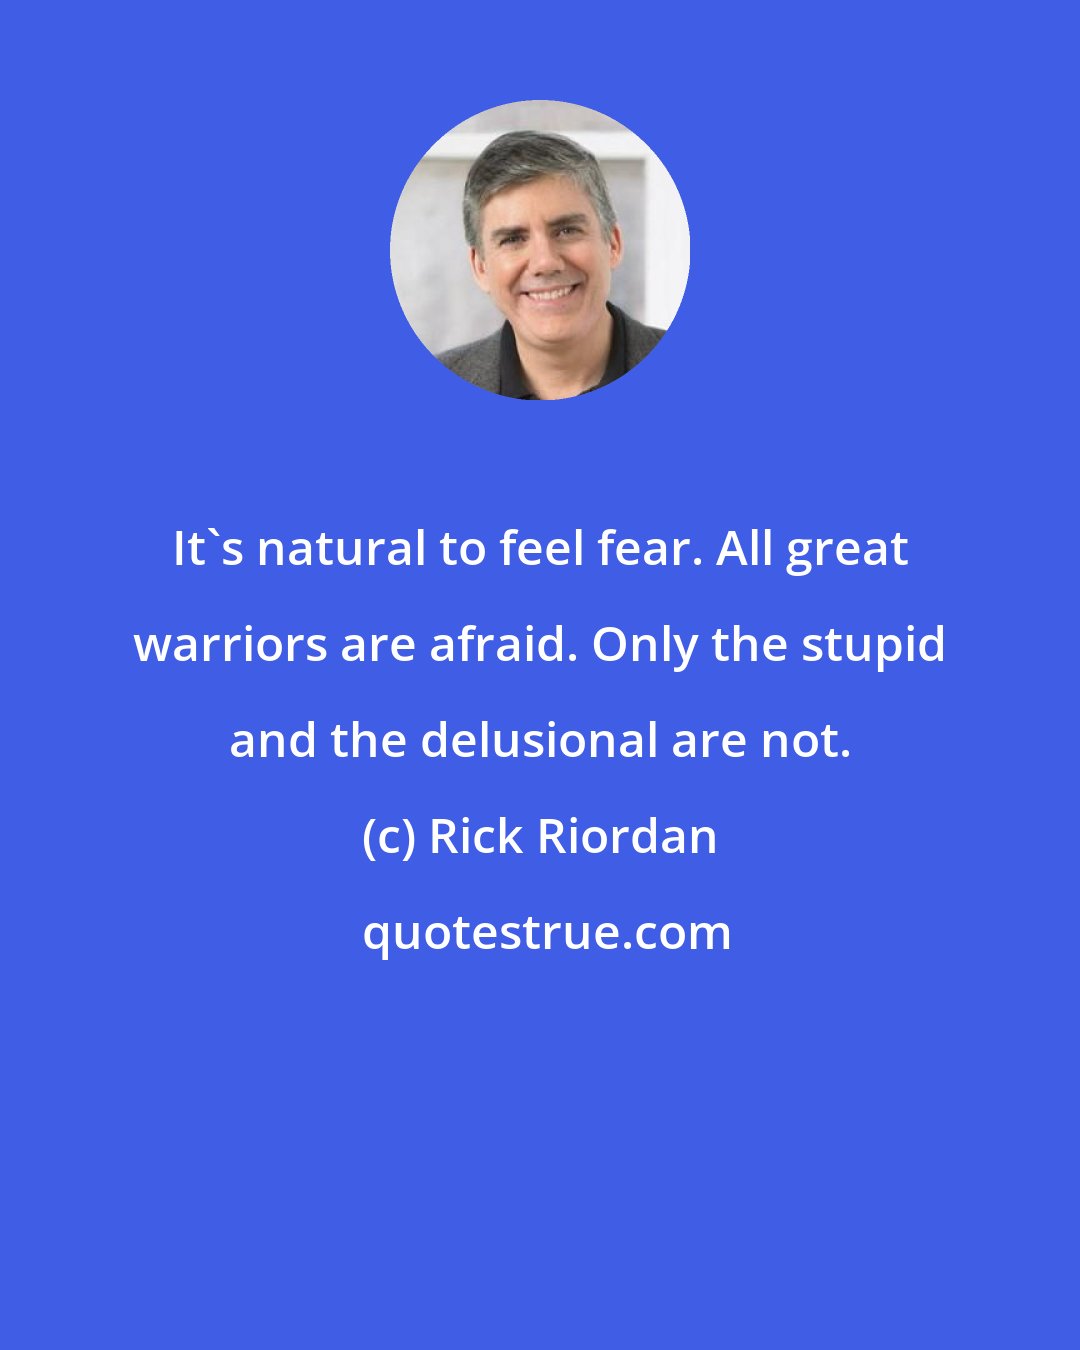 Rick Riordan: It's natural to feel fear. All great warriors are afraid. Only the stupid and the delusional are not.